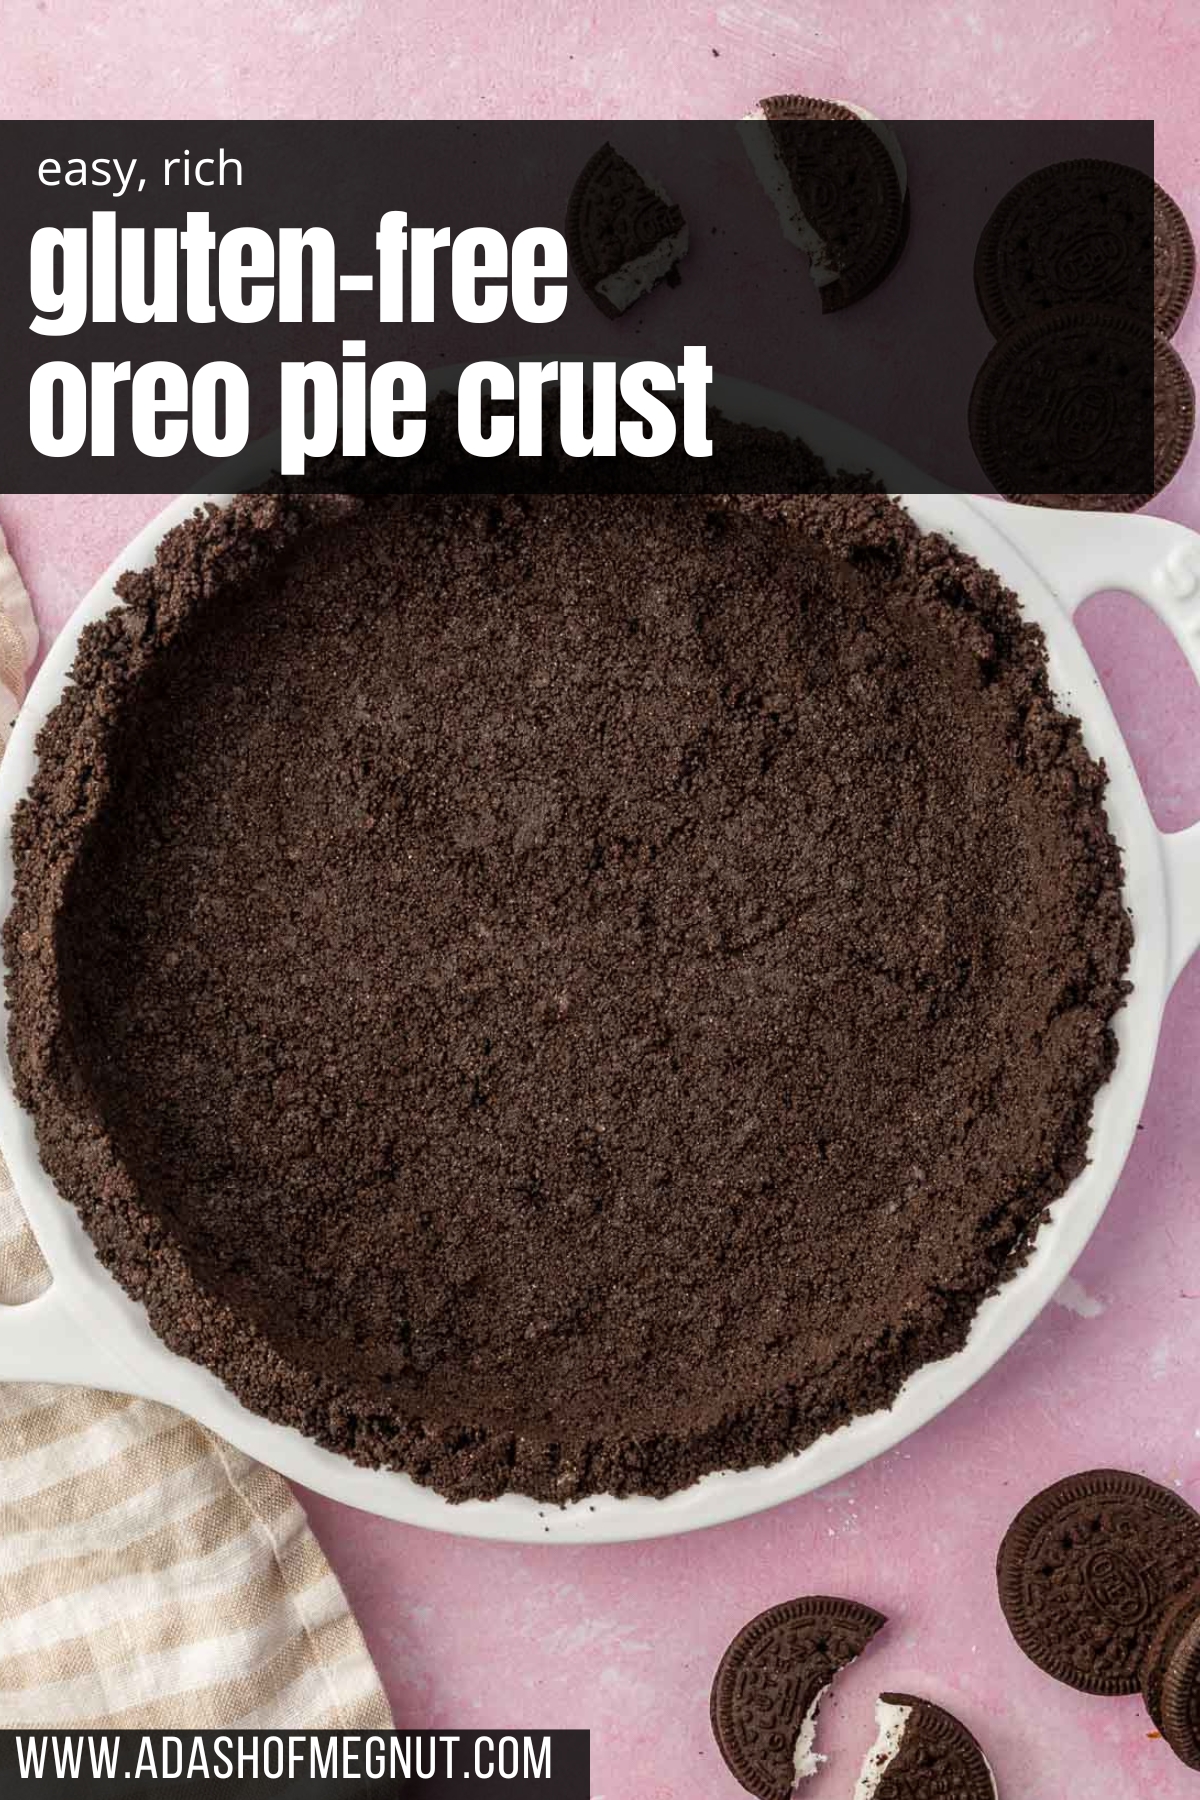 An oreo pie crust pressed into a white tart pan with whole and broken gluten-free Oreos surrounding the pan on the surface.